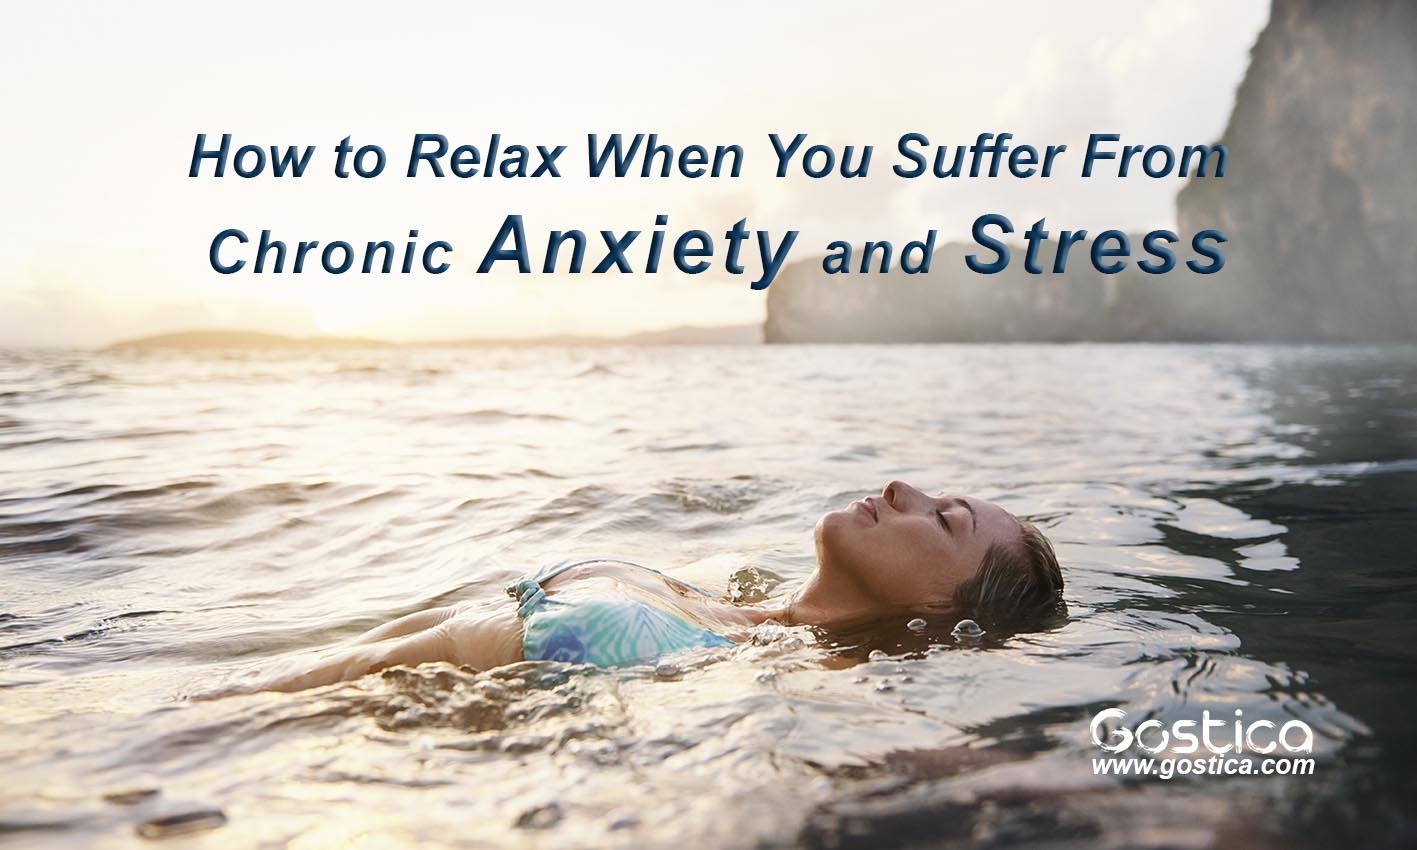 How to Relax When You Suffer From Chronic Anxiety and Stress